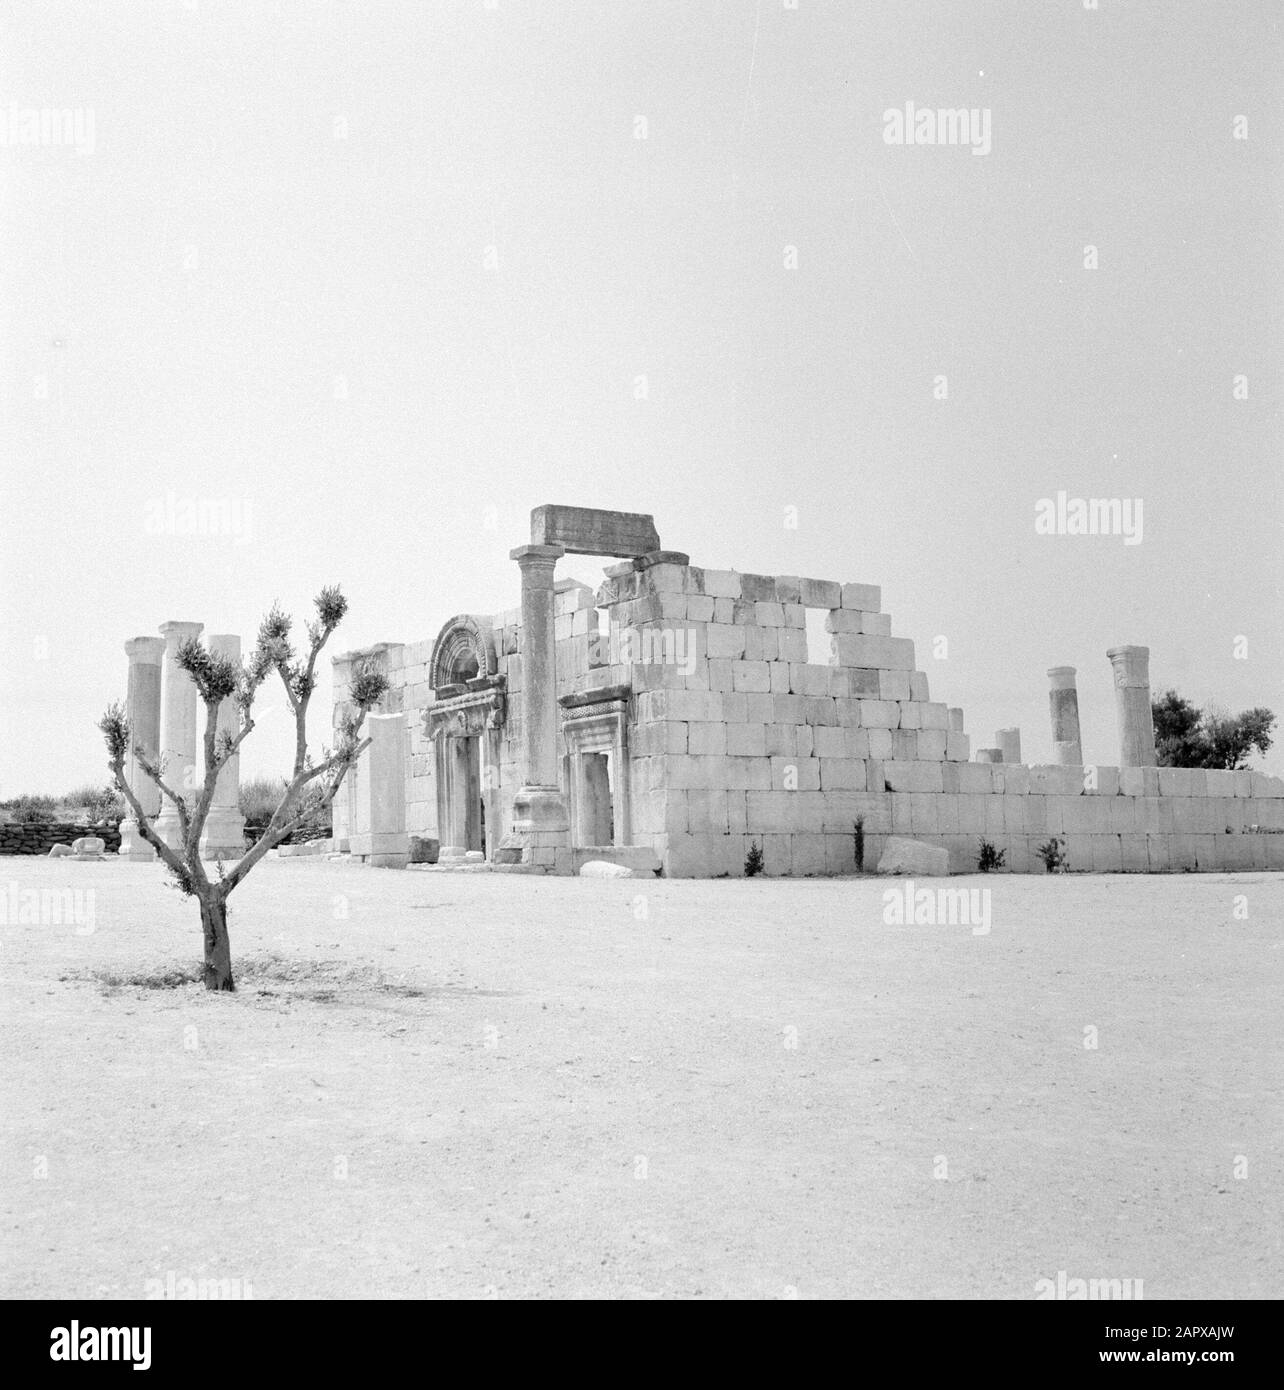 Israel 1964-1965: Bar'am, ruin synagogue  Ruins of the ancient synagogue in Kfar Bar'am Annotation: Bar'am is a kibbutz in northern Israel, located about 300 meters from the border with Lebanon. Bar'am National Park is known for the remains of one of Israel's oldest synagogues Date: 1964 Location: Bar'am, Israel Keywords: archeology, sculptures, trees, ruins, synagogues Stock Photo